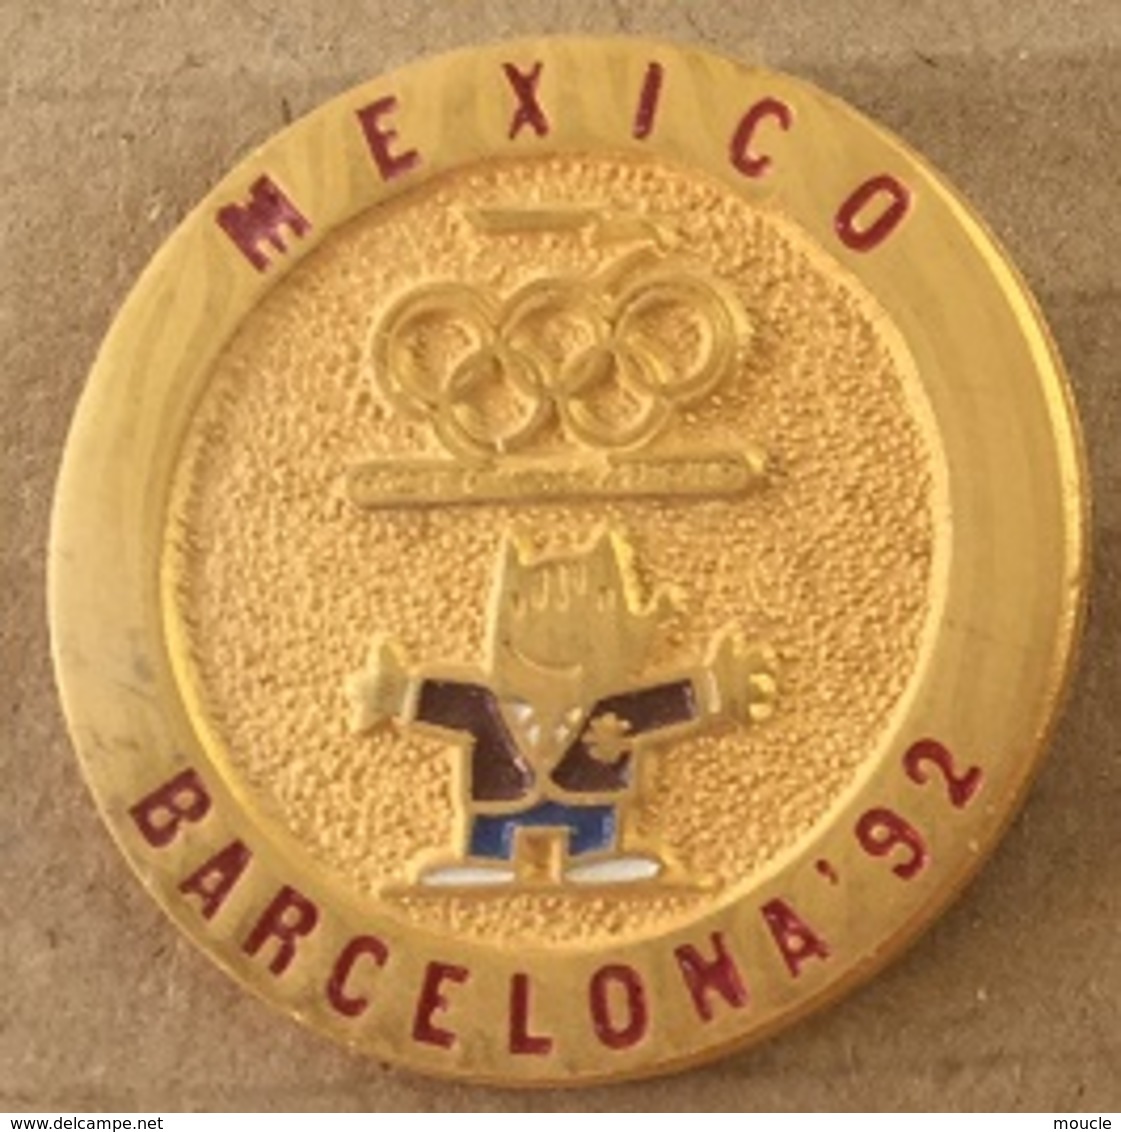 JEUX OLYMPIQUES - BARCELONA'92 - TEAM OF MEXICO - COMITE OLYMPIC - MEXIQUE - ESPAGNE - SPAIN  -    (20) - Jeux Olympiques